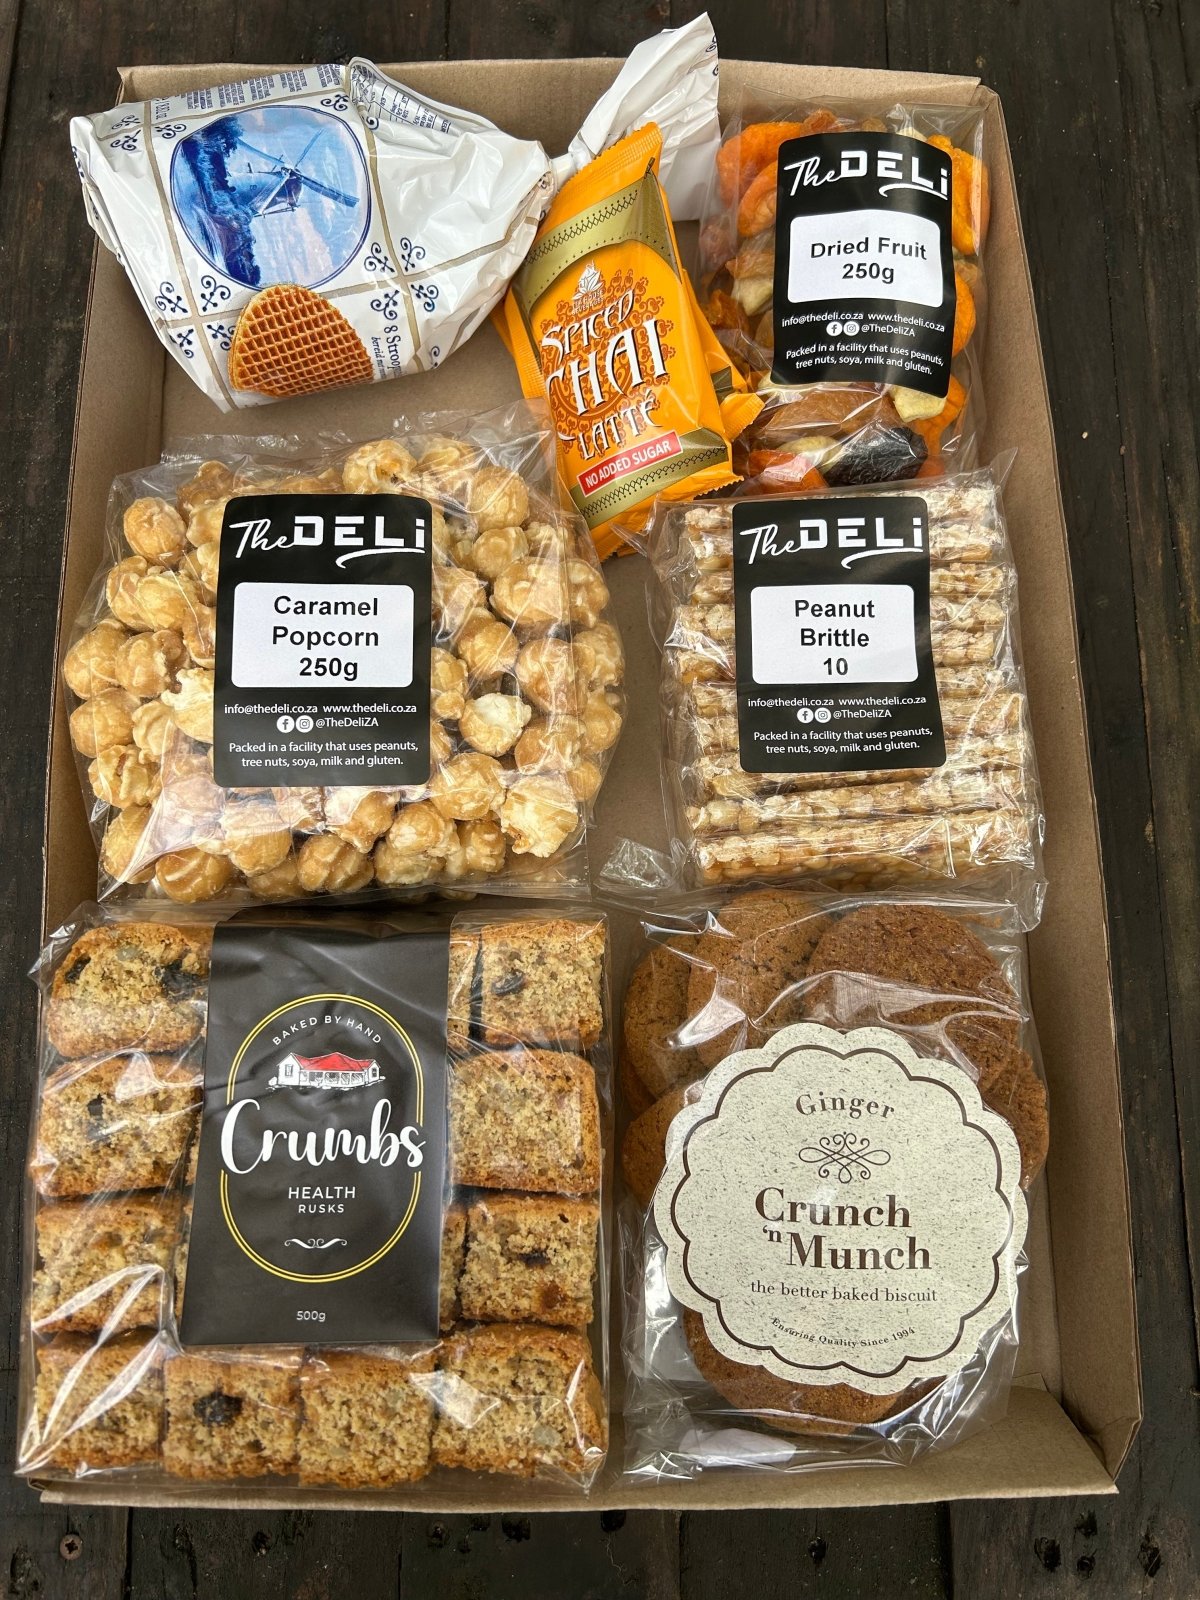 Our Family Gift Box - The Deli